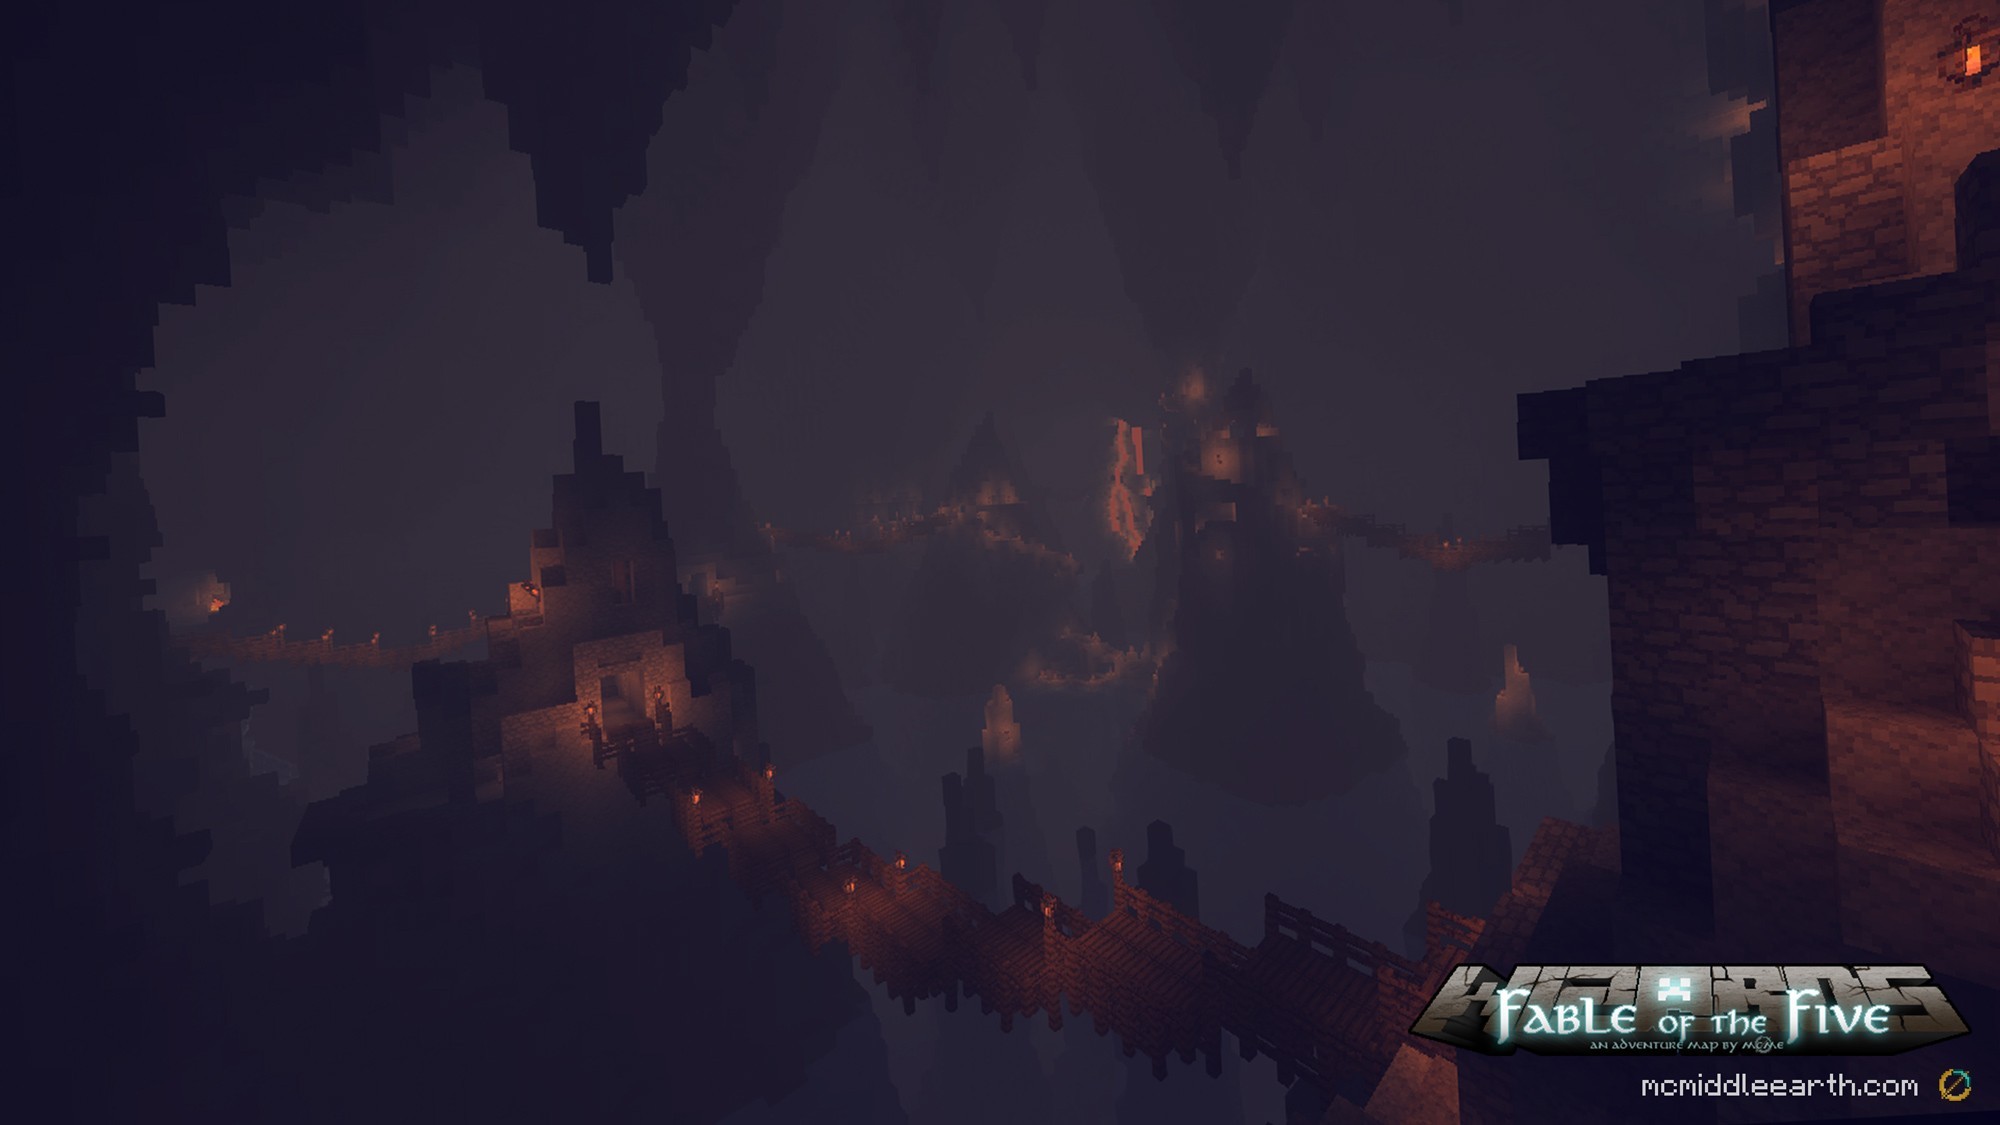 Fable of the Five - Stalagtites